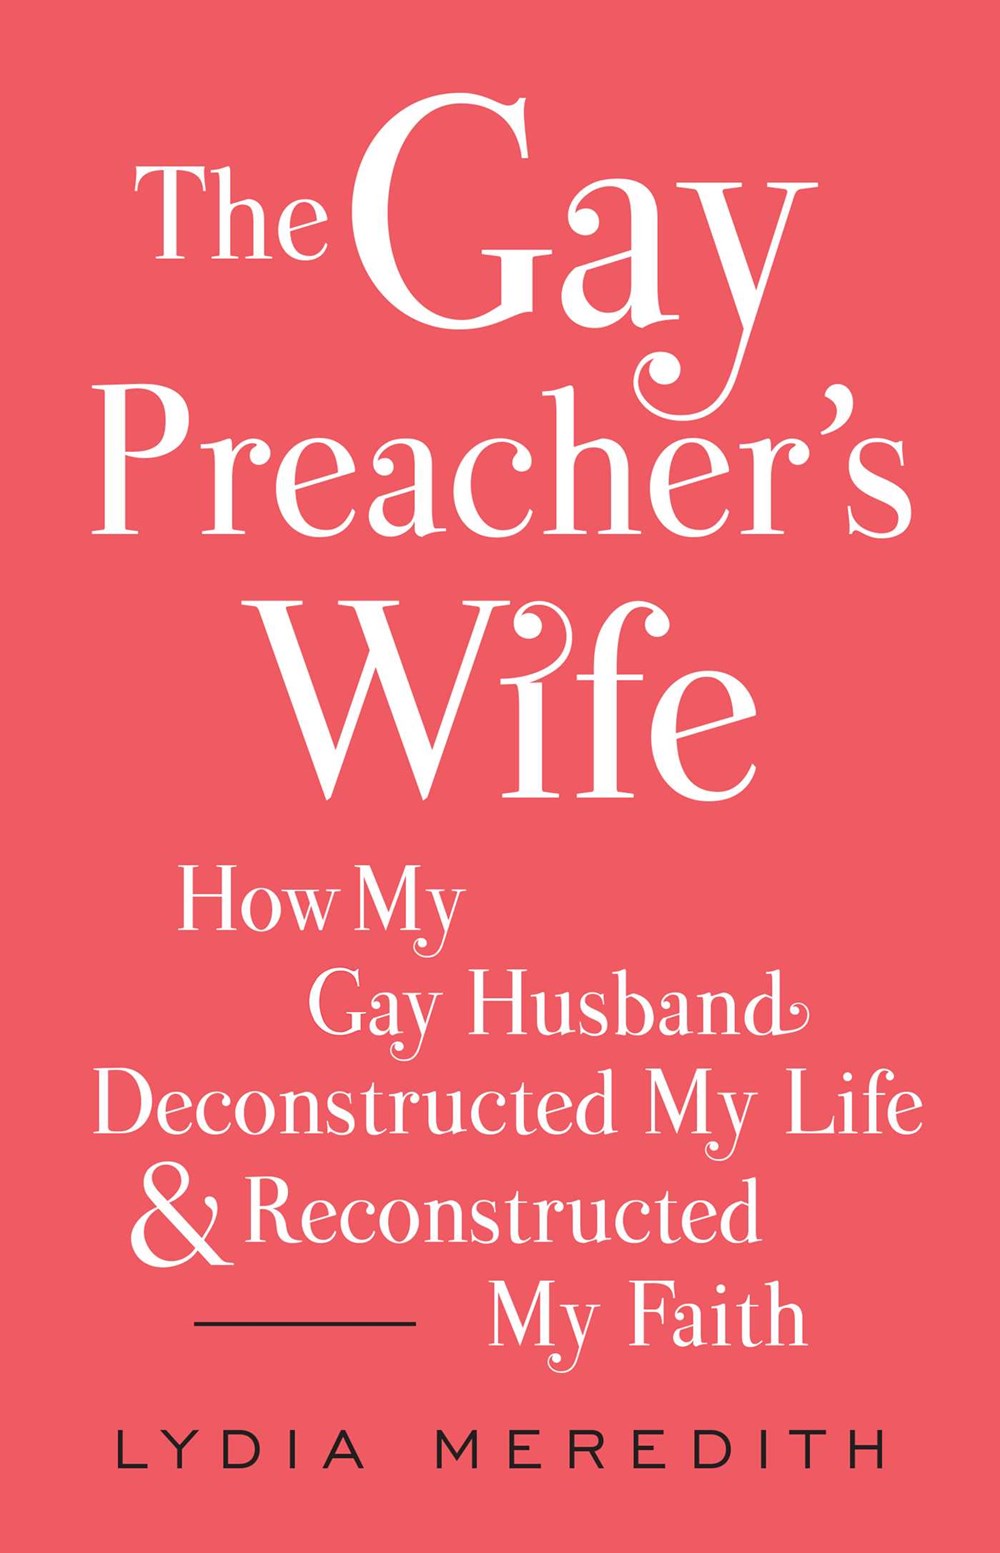 Excerpt The Gay Preachers Wife How My Gay Husband Deconstructed My Life and Reconstructed My Faith byLydia Meredith